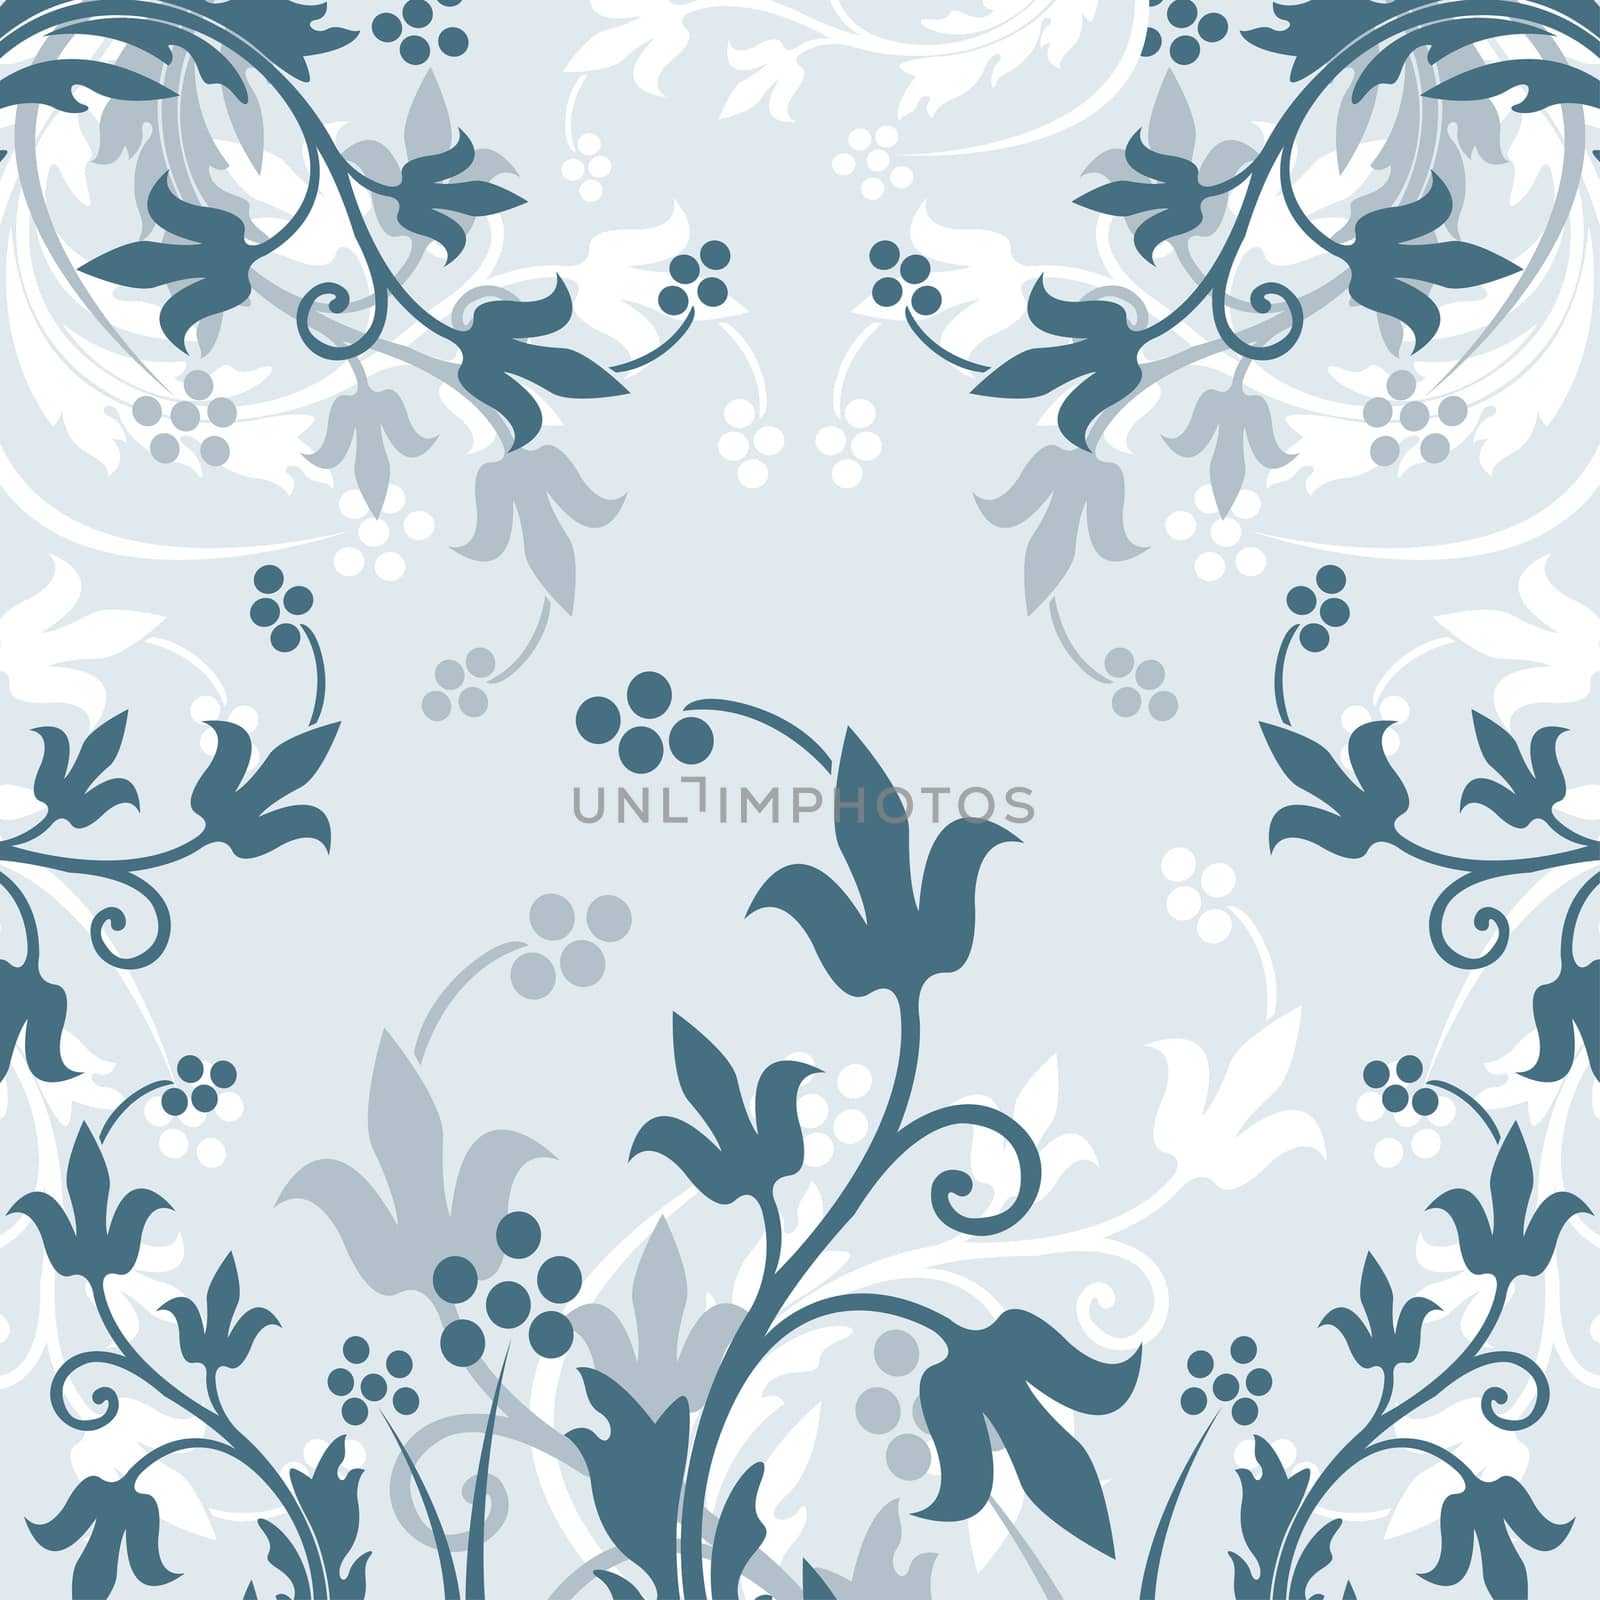 Floral background by WaD